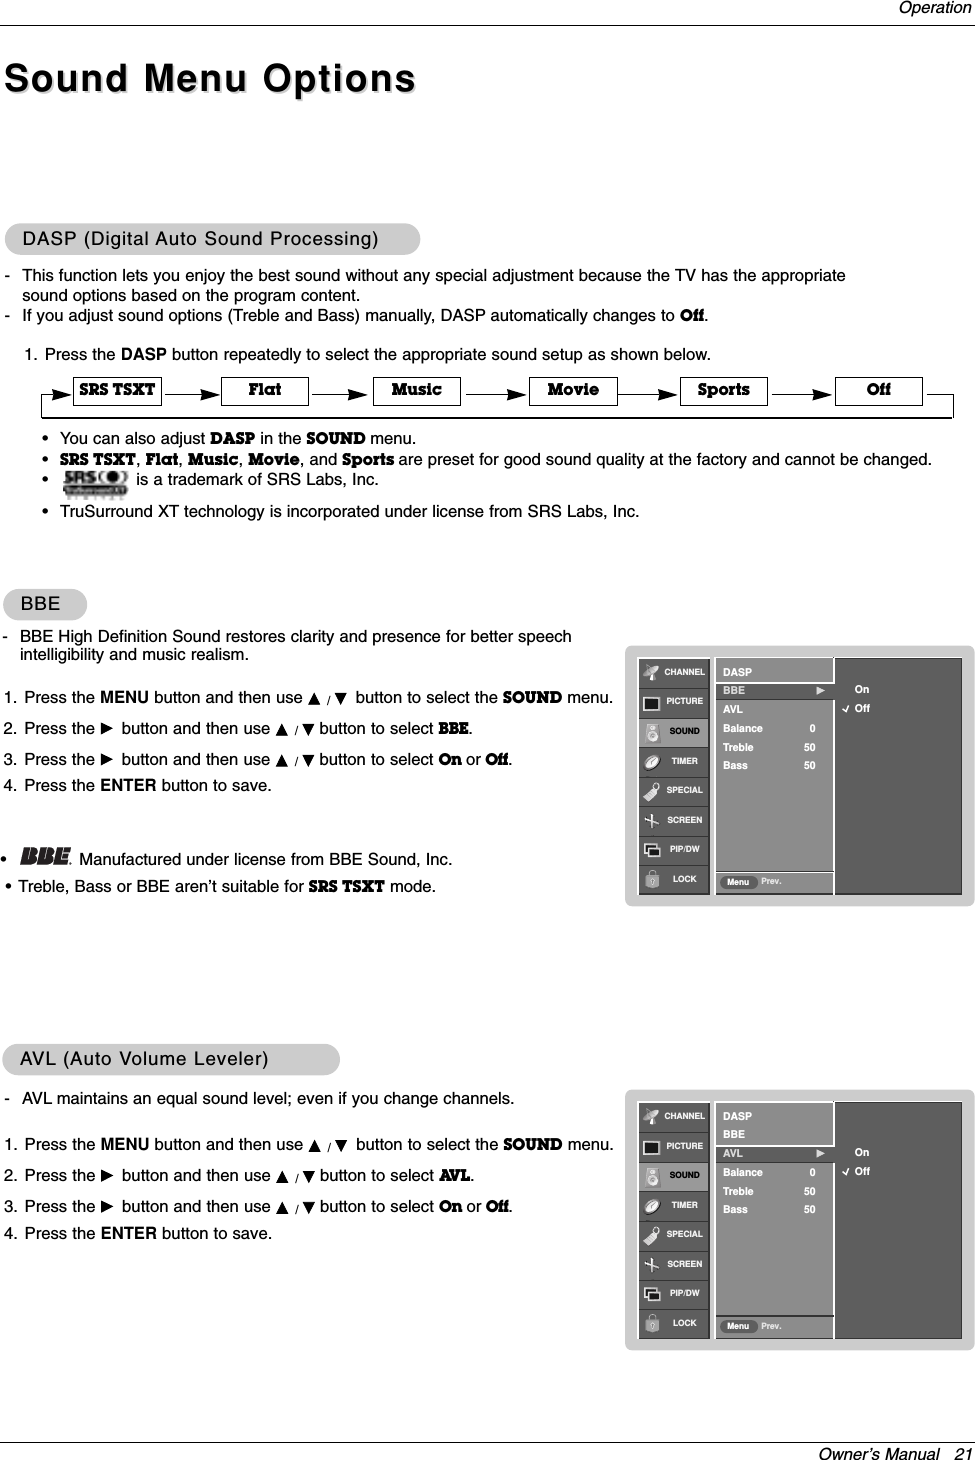 Owner’s Manual   21Operation1. Press the DASP button repeatedly to select the appropriate sound setup as shown below.DASPDASP (Digital (Digital Auto Sound Processing)Auto Sound Processing)•You can also adjust DASP in the SOUND menu.•SRS TSXT, Flat, Music, Movie, and Sports are preset for good sound quality at the factory and cannot be changed.•is a trademark of SRS Labs, Inc.•TruSurround XT technology is incorporated under license from SRS Labs, Inc.Flat Music Movie Sports OffSRS TSXT- This function lets you enjoy the best sound without any special adjustment because the TV has the appropriatesound options based on the program content.- If you adjust sound options (Treble and Bass) manually, DASP automatically changes to Off.- AVL maintains an equal sound level; even if you change channels.1. Press the MENU button and then use D / Ebutton to select the SOUND menu.2. Press the Gbutton and then use D / Ebutton to select AV L . 3. Press the Gbutton and then use D / Ebutton to select On or Off.4. Press the ENTER button to save.AAVLVL (Auto V(Auto Volume Leveler)olume Leveler)Sound Menu OptionsSound Menu OptionsCHANNELPICTURESOUNDTIMERSPECIALSCREENPIP/DWLOCK Prev.MenuOnOffDASPBBEAVL GBalance 0Treble 50Bass 501. Press the MENU button and then use D / Ebutton to select the SOUND menu.2. Press the Gbutton and then use D / Ebutton to select BBE. 3. Press the Gbutton and then use D / Ebutton to select On or Off.4. Press the ENTER button to save.BBEBBE- BBE High Definition Sound restores clarity and presence for better speechintelligibility and music realism.•Manufactured under license from BBE Sound, Inc.•Treble, Bass or BBE aren’t suitable for SRS TSXT mode.CHANNELPICTURESOUNDTIMERSPECIALSCREENPIP/DWLOCK Prev.MenuOnOffDASPBBE  GAVLBalance 0Treble 50Bass 50